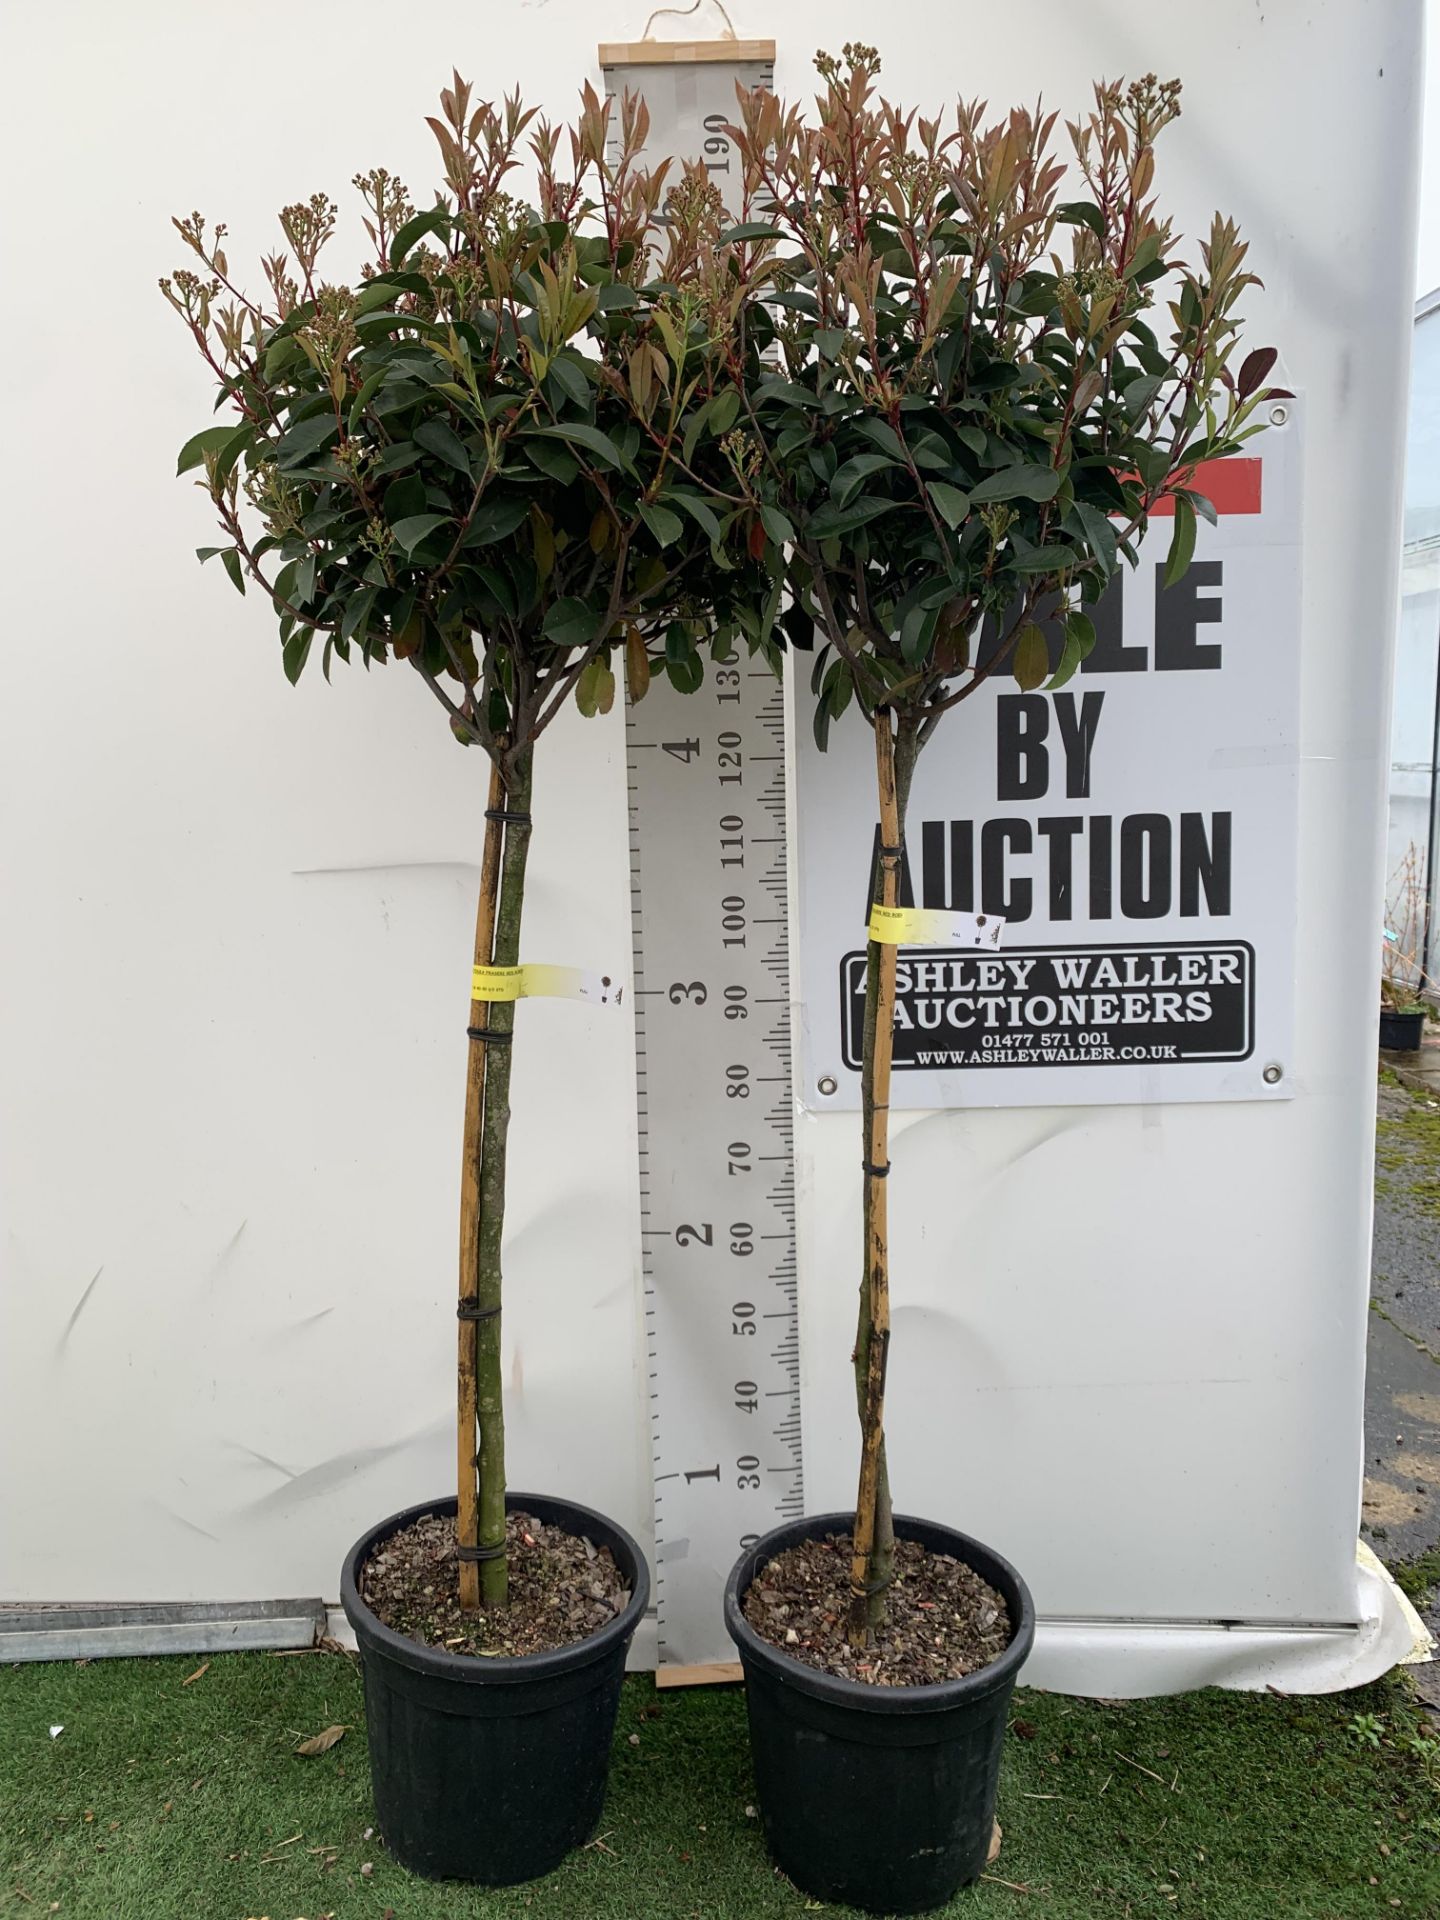 TWO PHOTINIA FRASERI 'RED ROBIN' STANDARD TREES APPROX 180CM IN HEIGHT IN 15 LTR POTS PLUS VAT TO BE